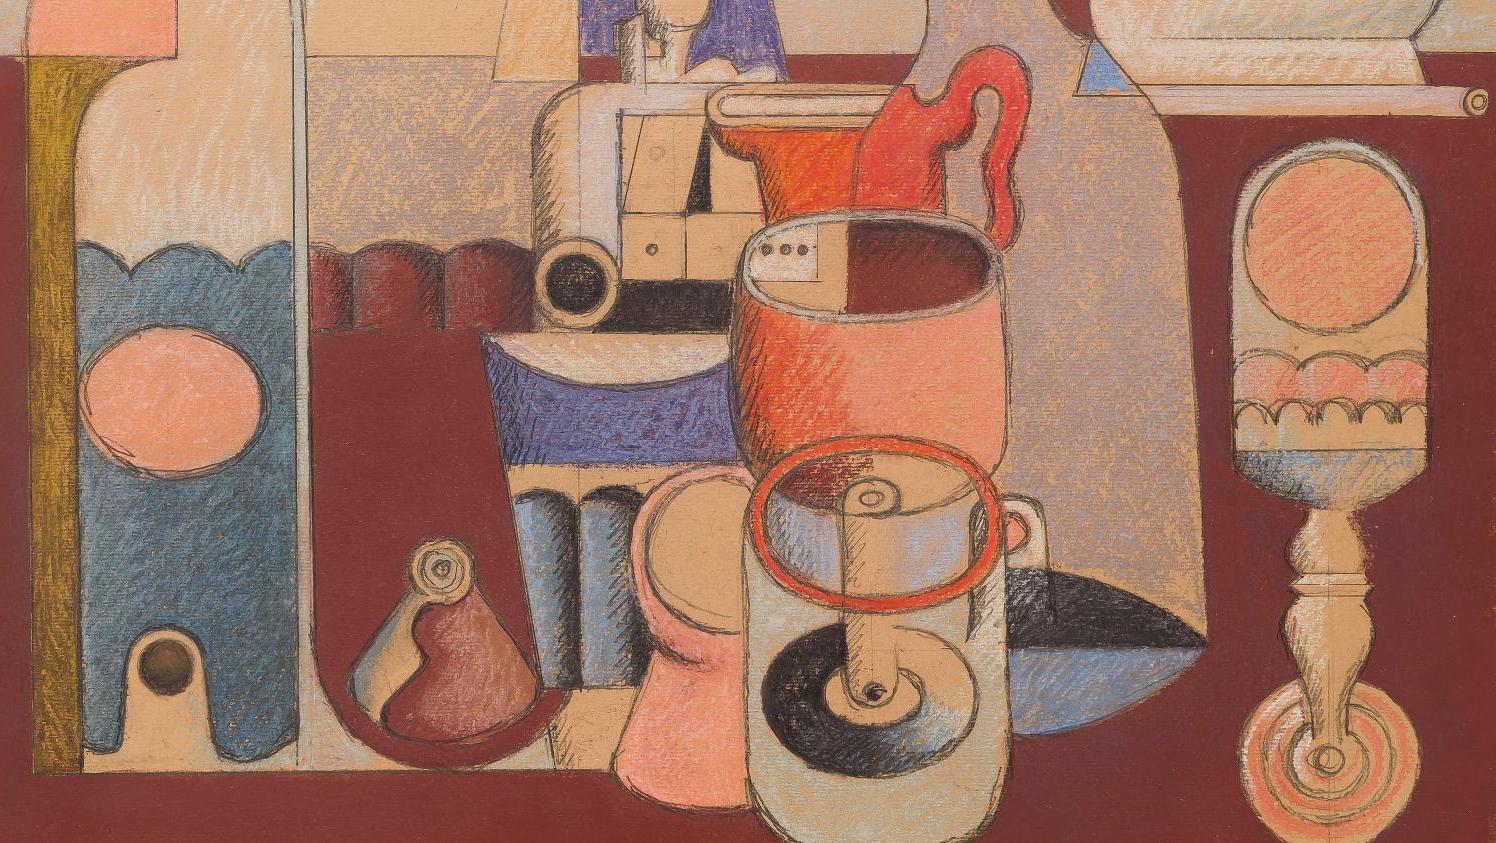 Charles-Édouard Jeanneret known as Le Corbusier (1887-1965), Still Life with Bottles,... “Still Life with Bottles” by Le Corbusier